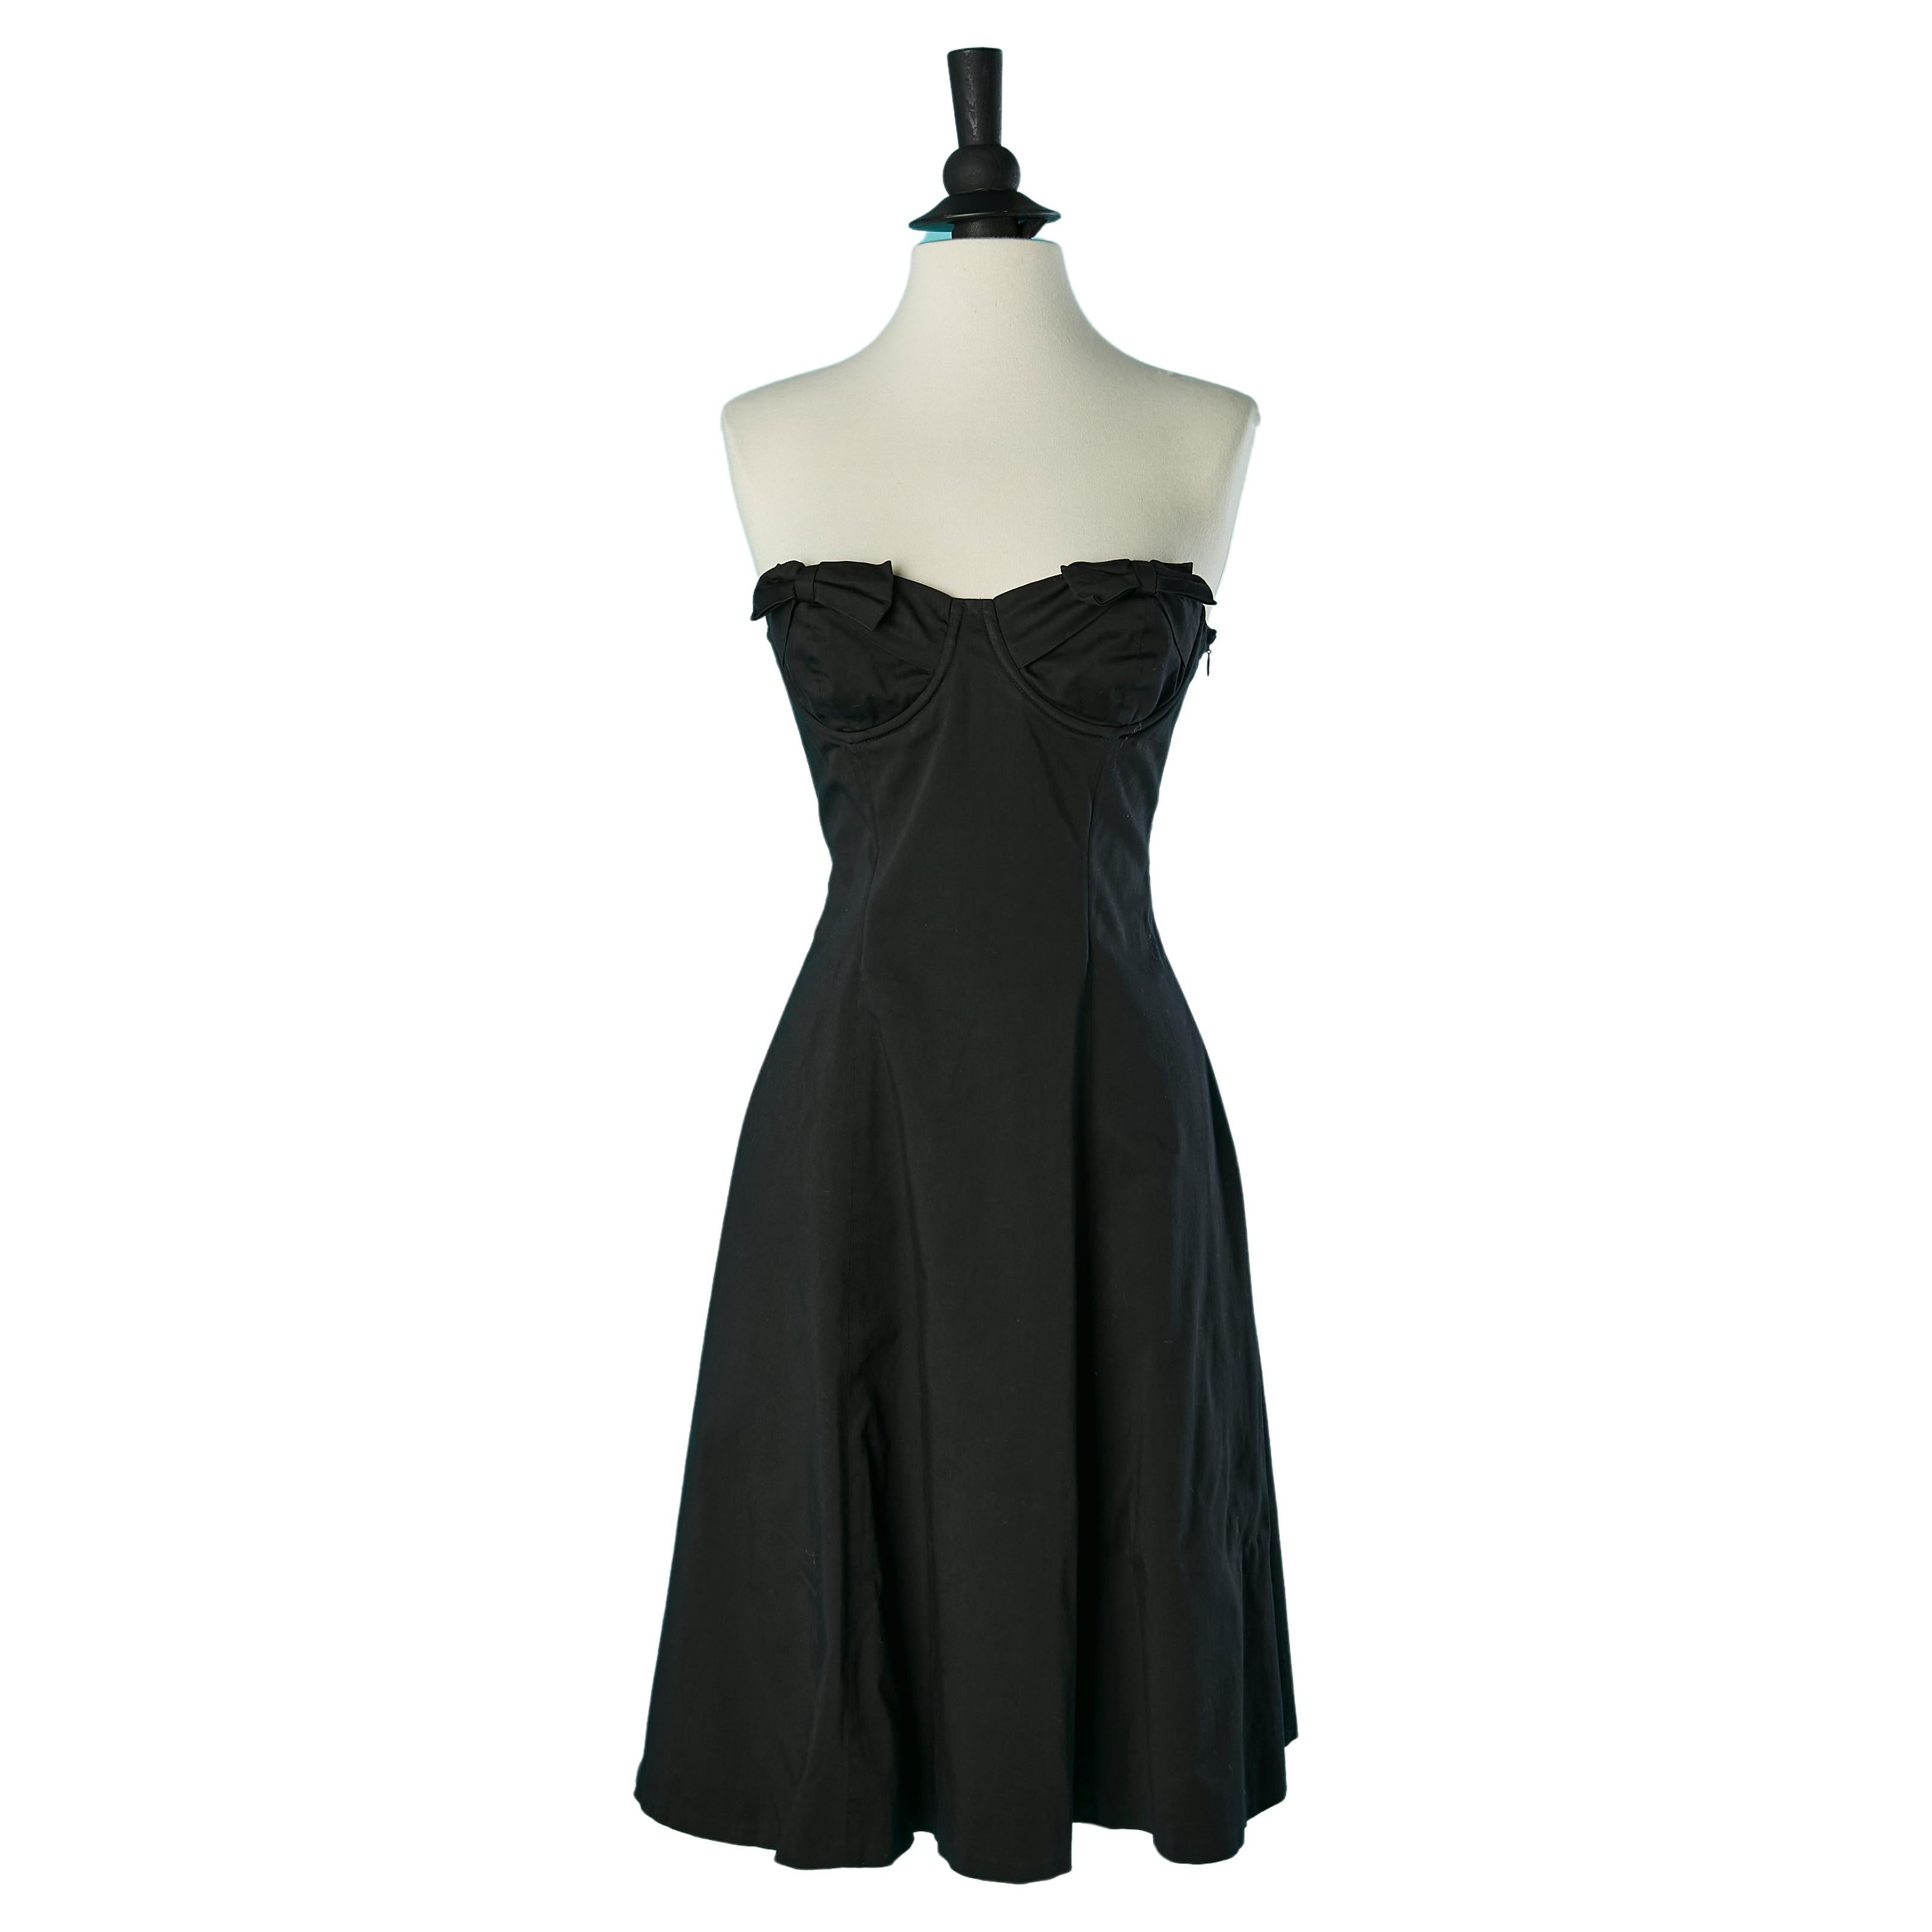 Black bustier cocktail dress with bow on the bust Moschino Cheap & Chic 